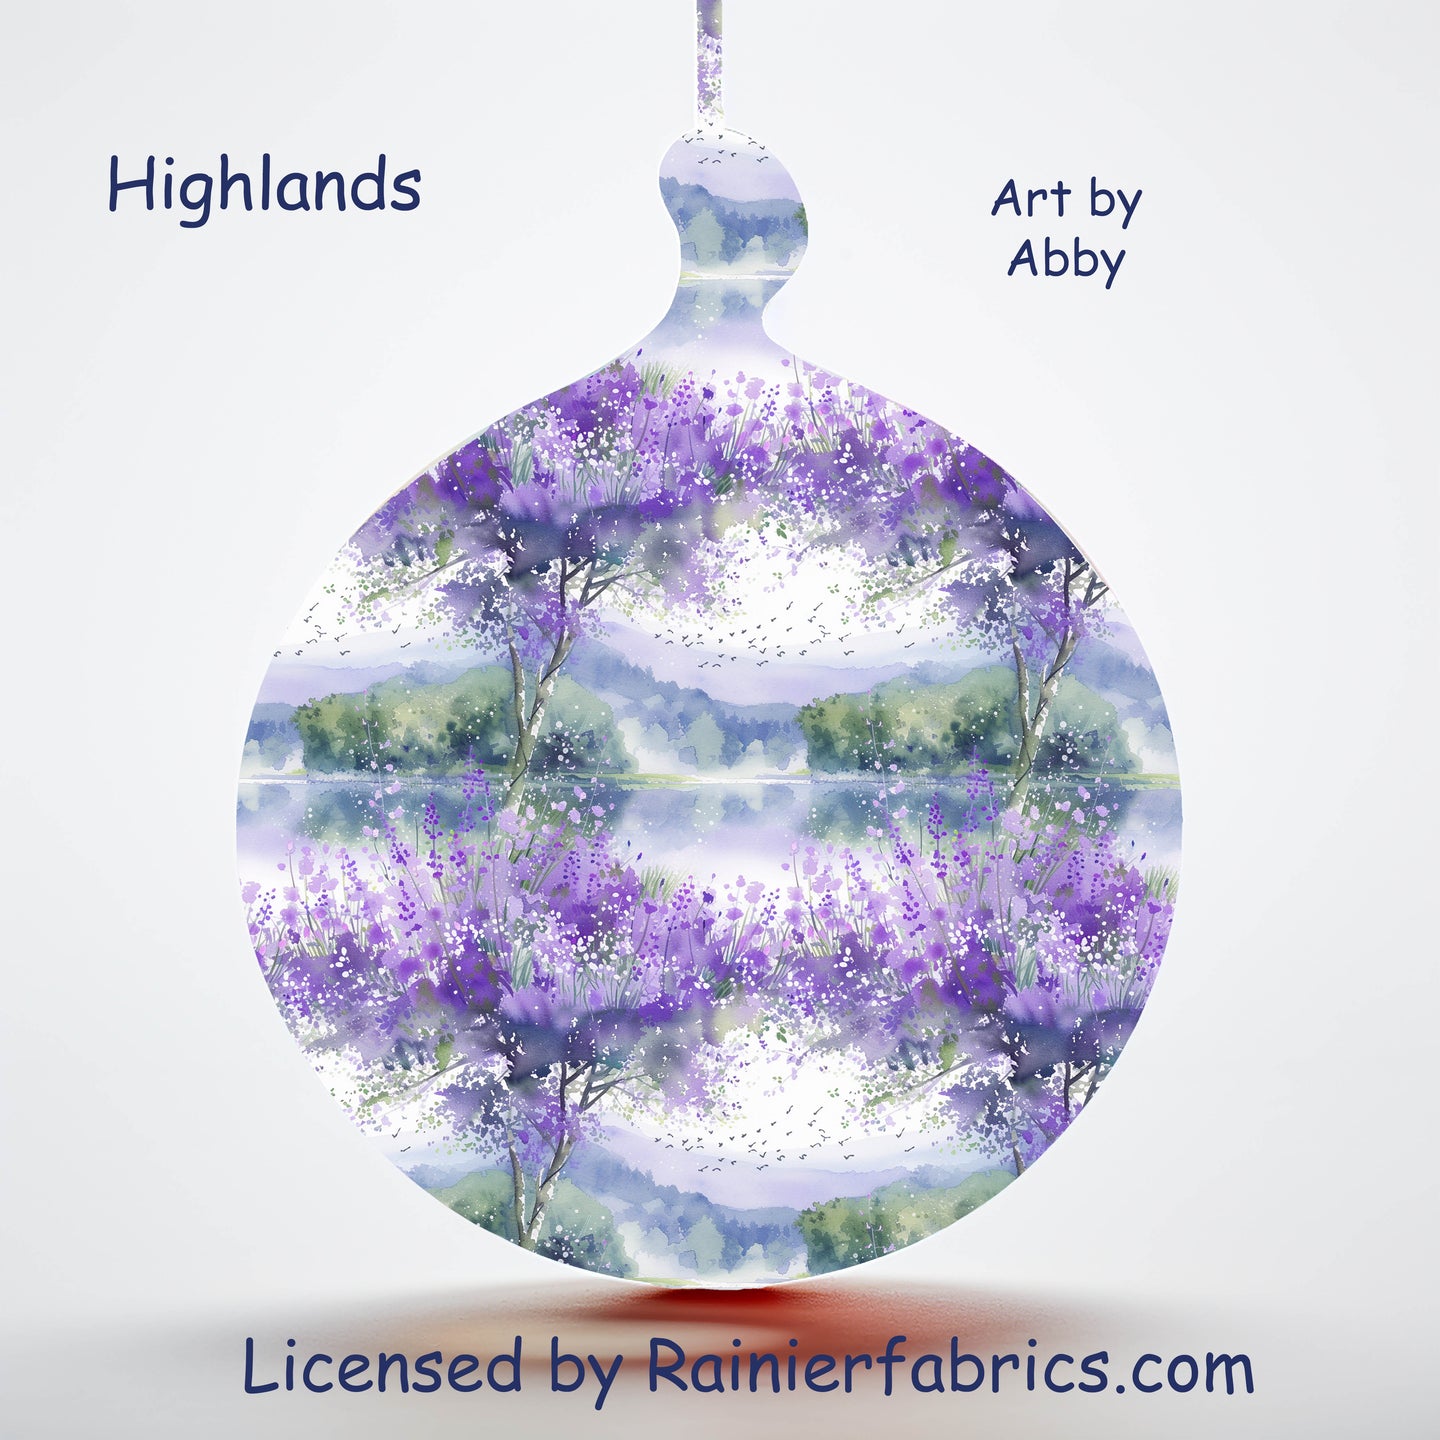 The Highlands by Abby